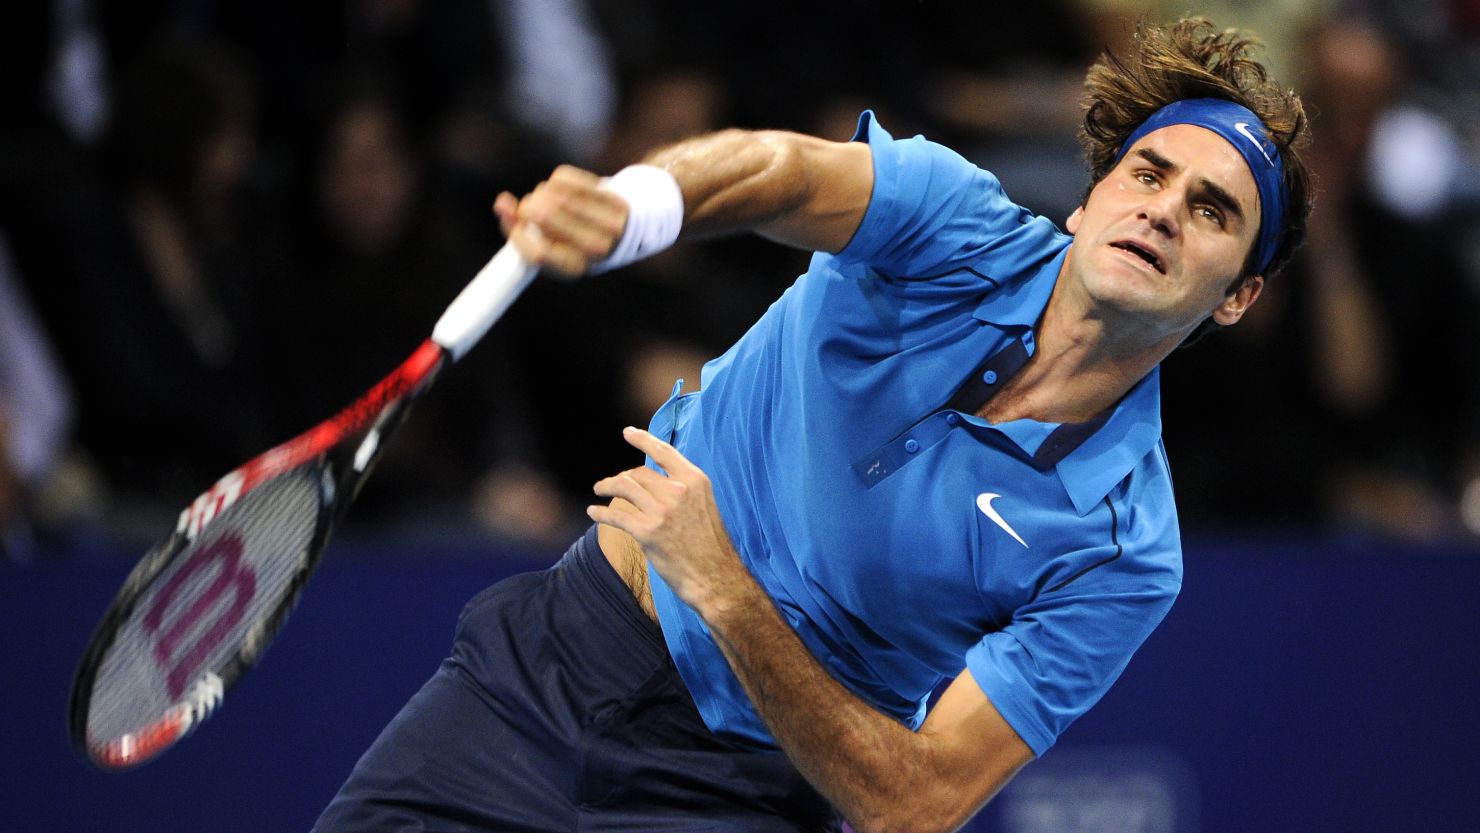 Switzerland's Roger Federer beat Japan's Kei Nishikori in last year's final in Basel as he ended 2011 with three successive titles.